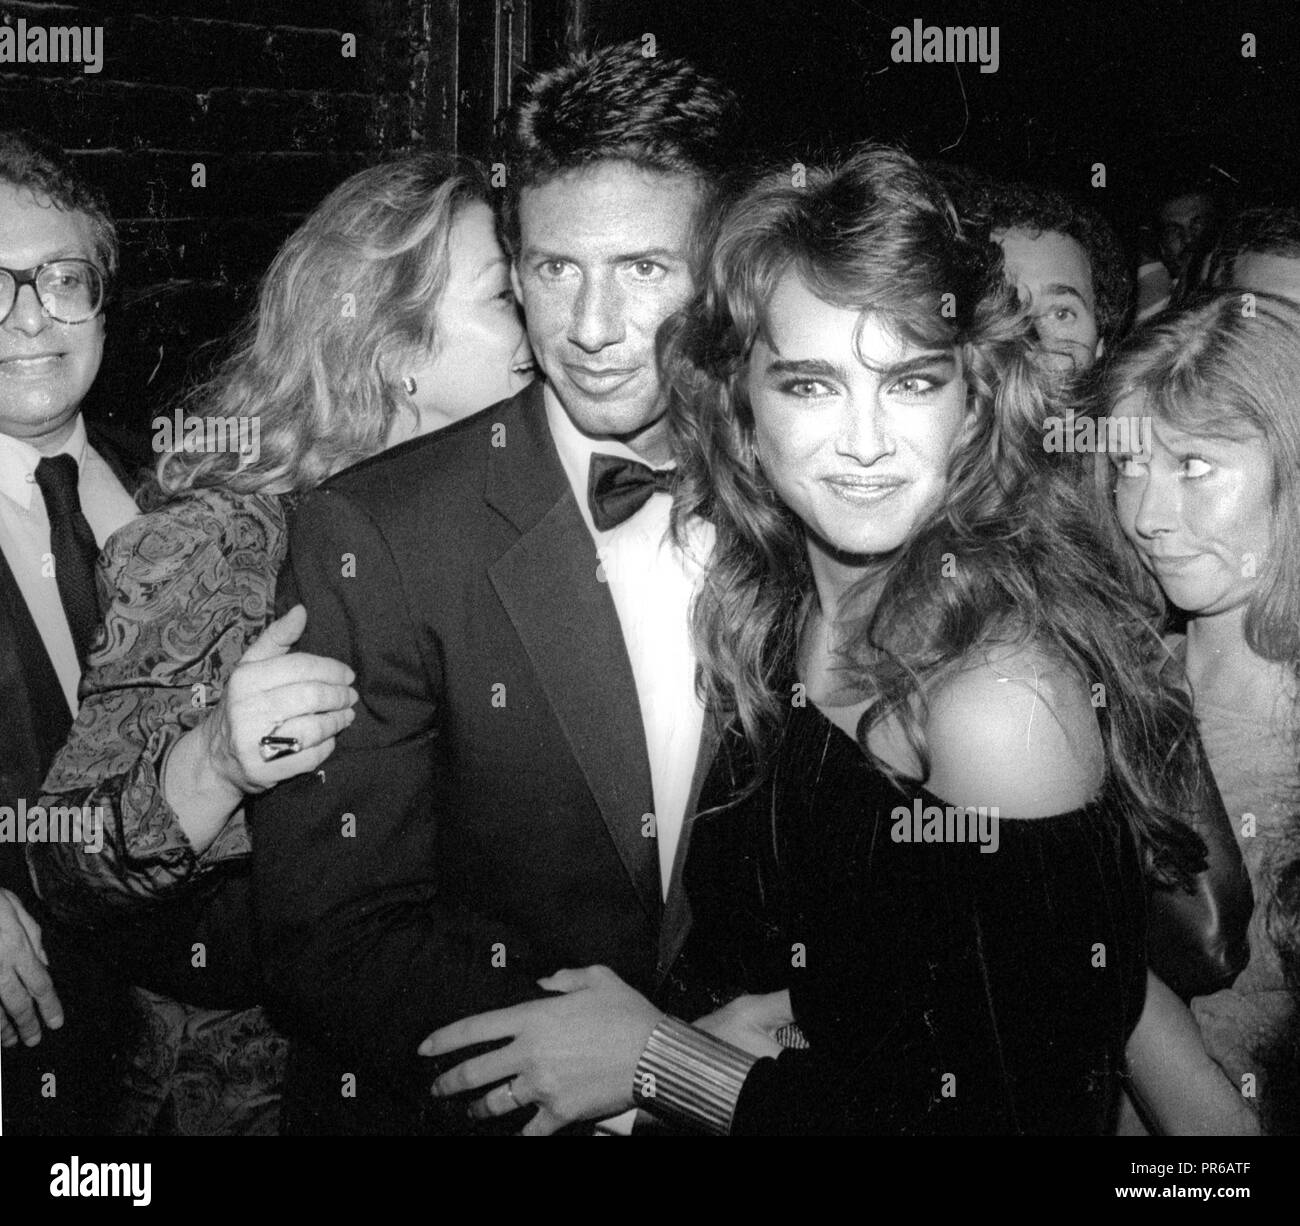 1981 New York City Calvin Klein and Brooke Shields at Studio 54 Credit ...